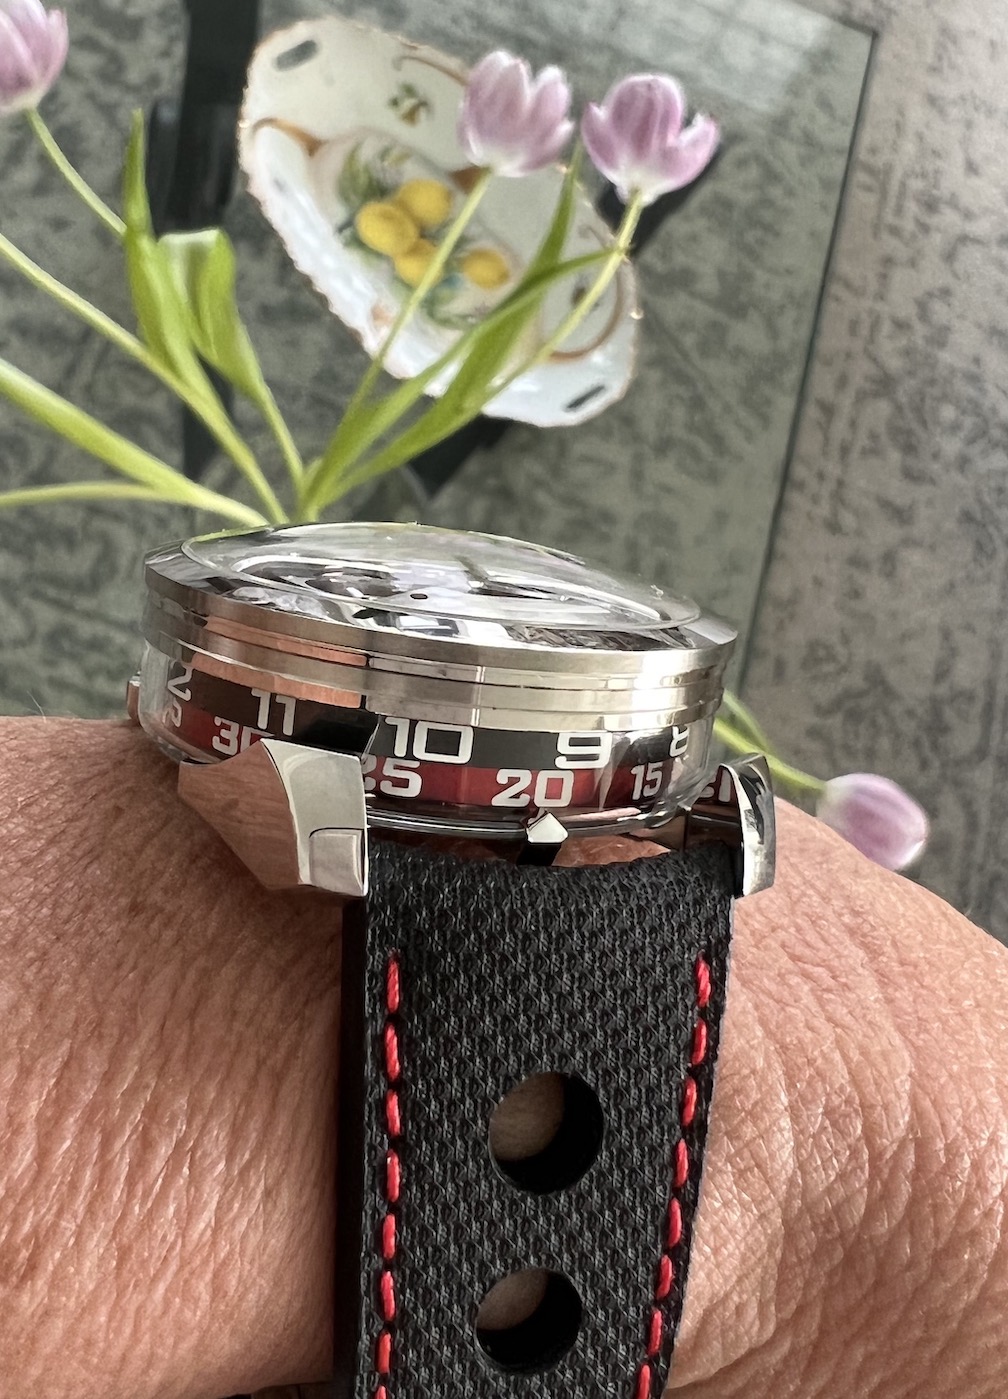 M.A.D. 1 Red watch designed by Max Busser of MB&F